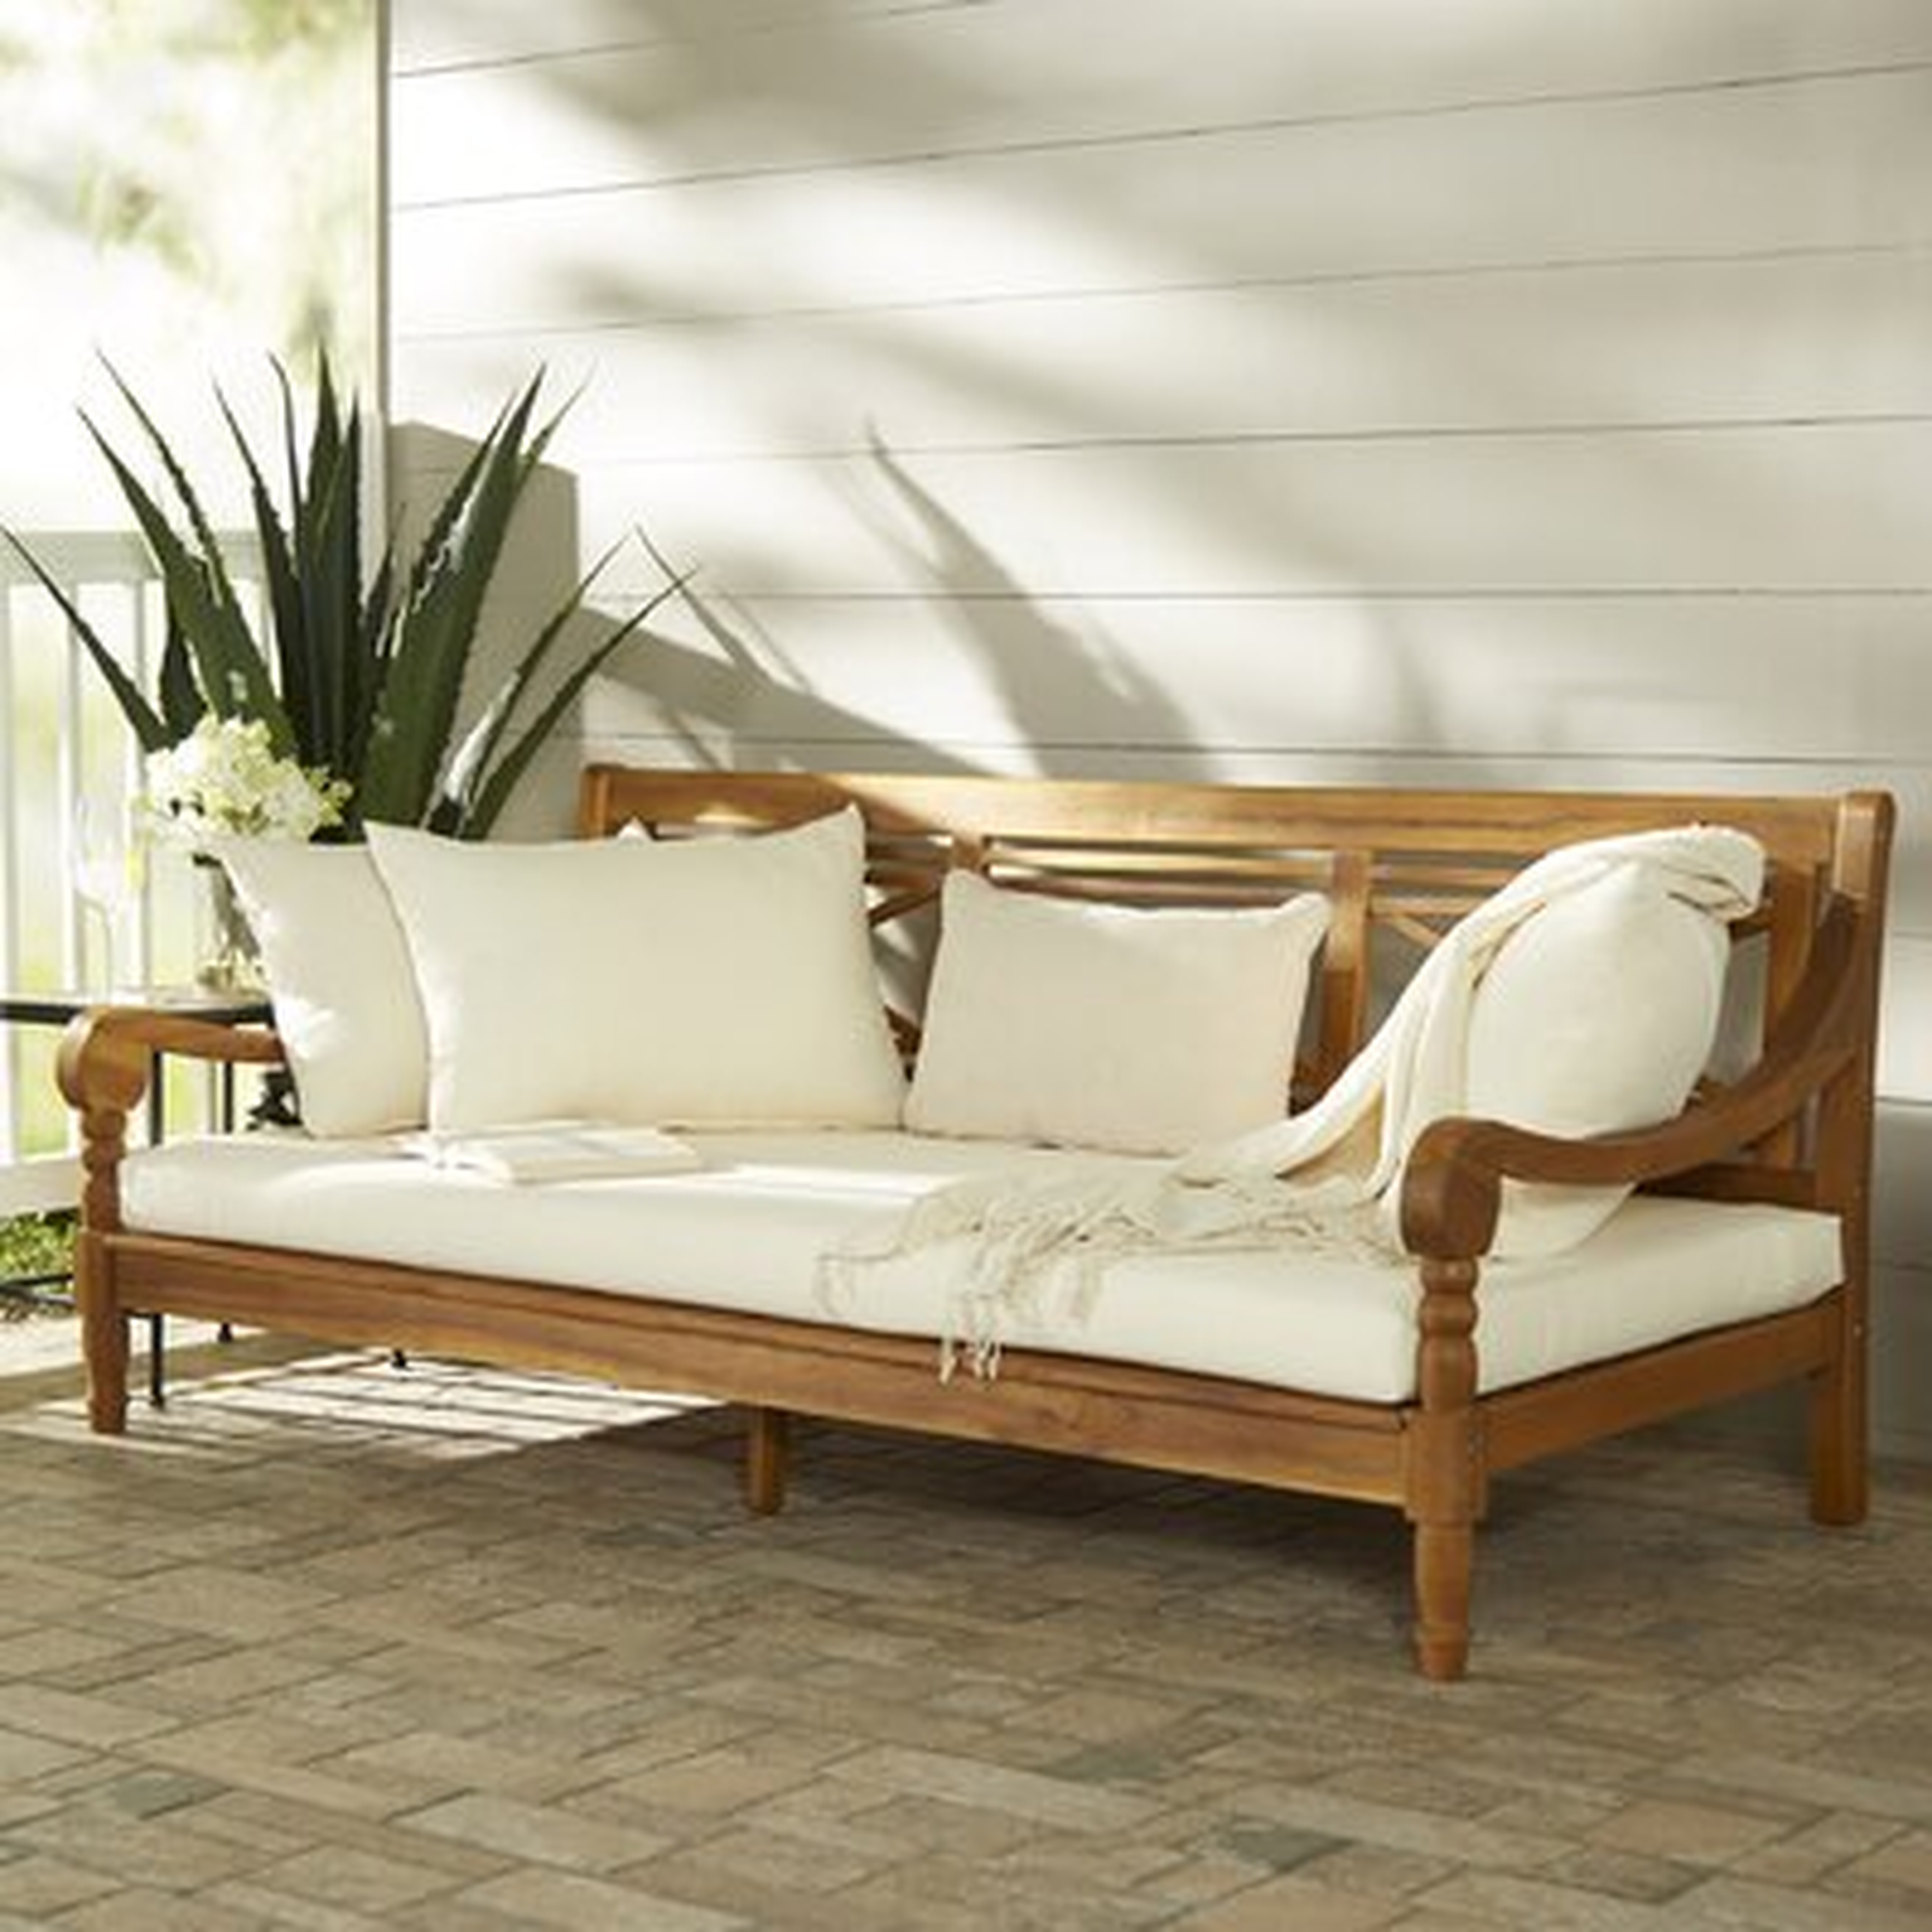 Roush Teak Patio Daybed with Cushions - Wayfair